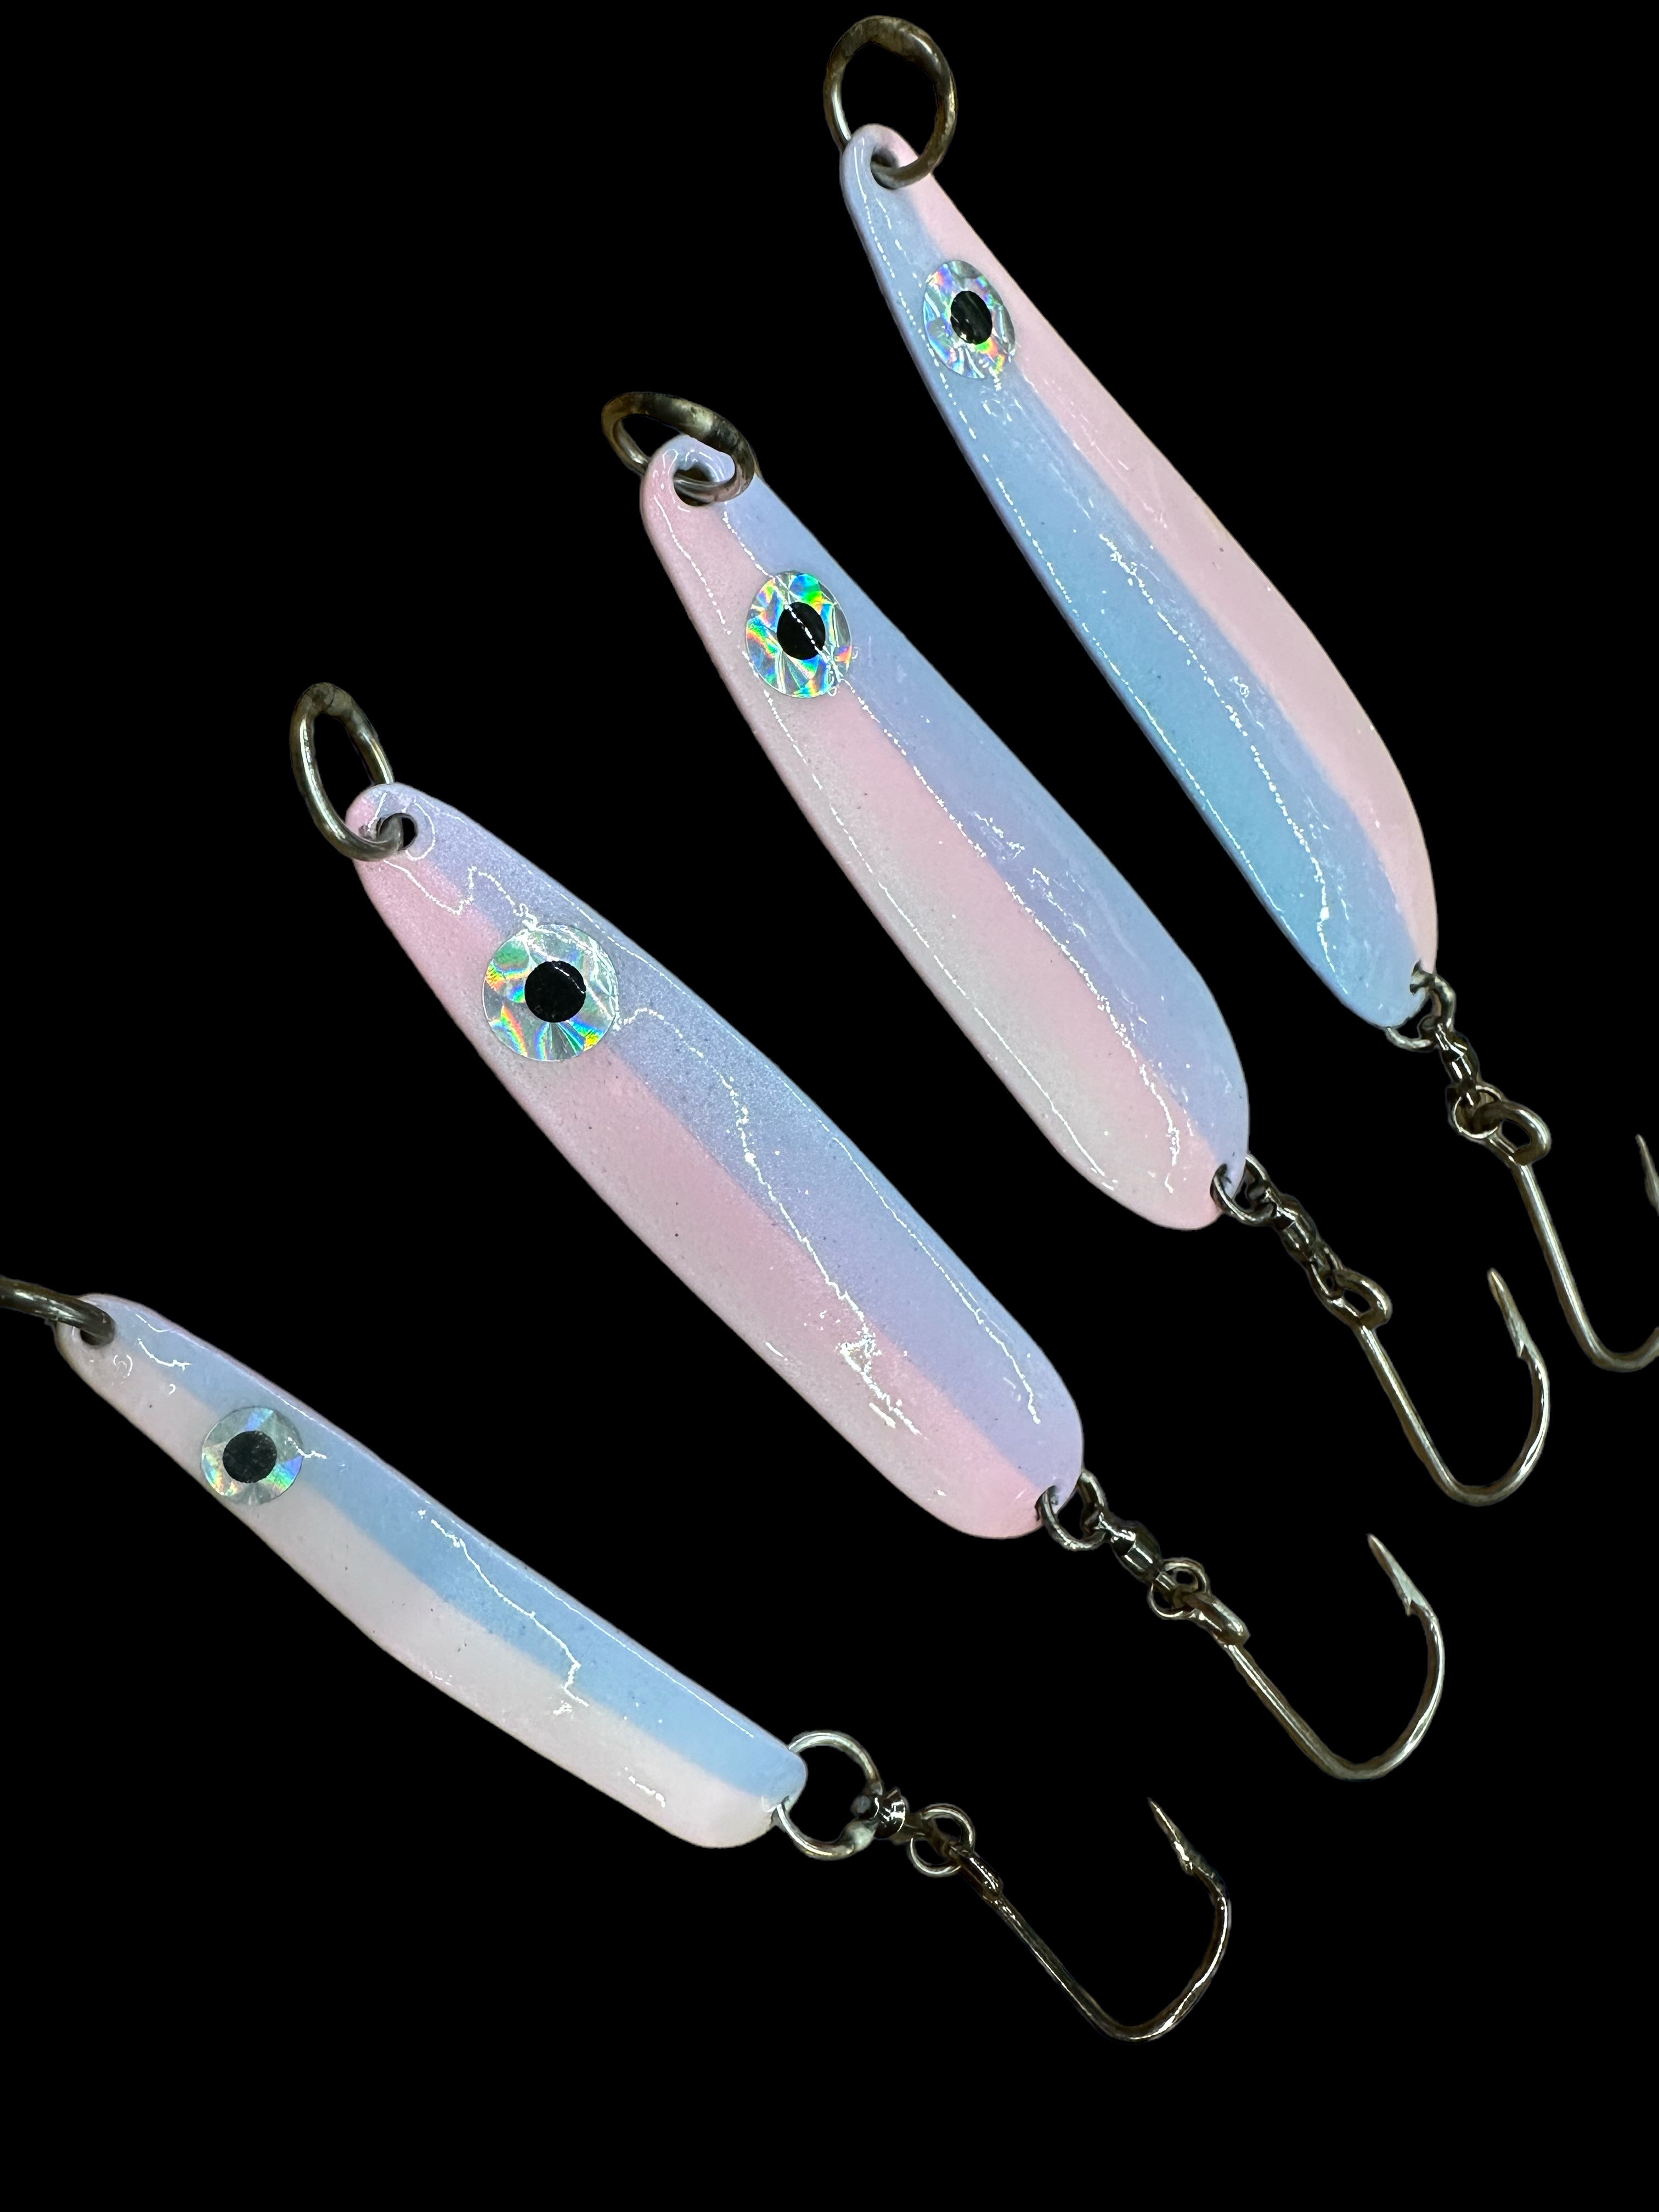 Custom Collab of Cotton Candy Spoon - 4-Pack - LIMITED EDITION